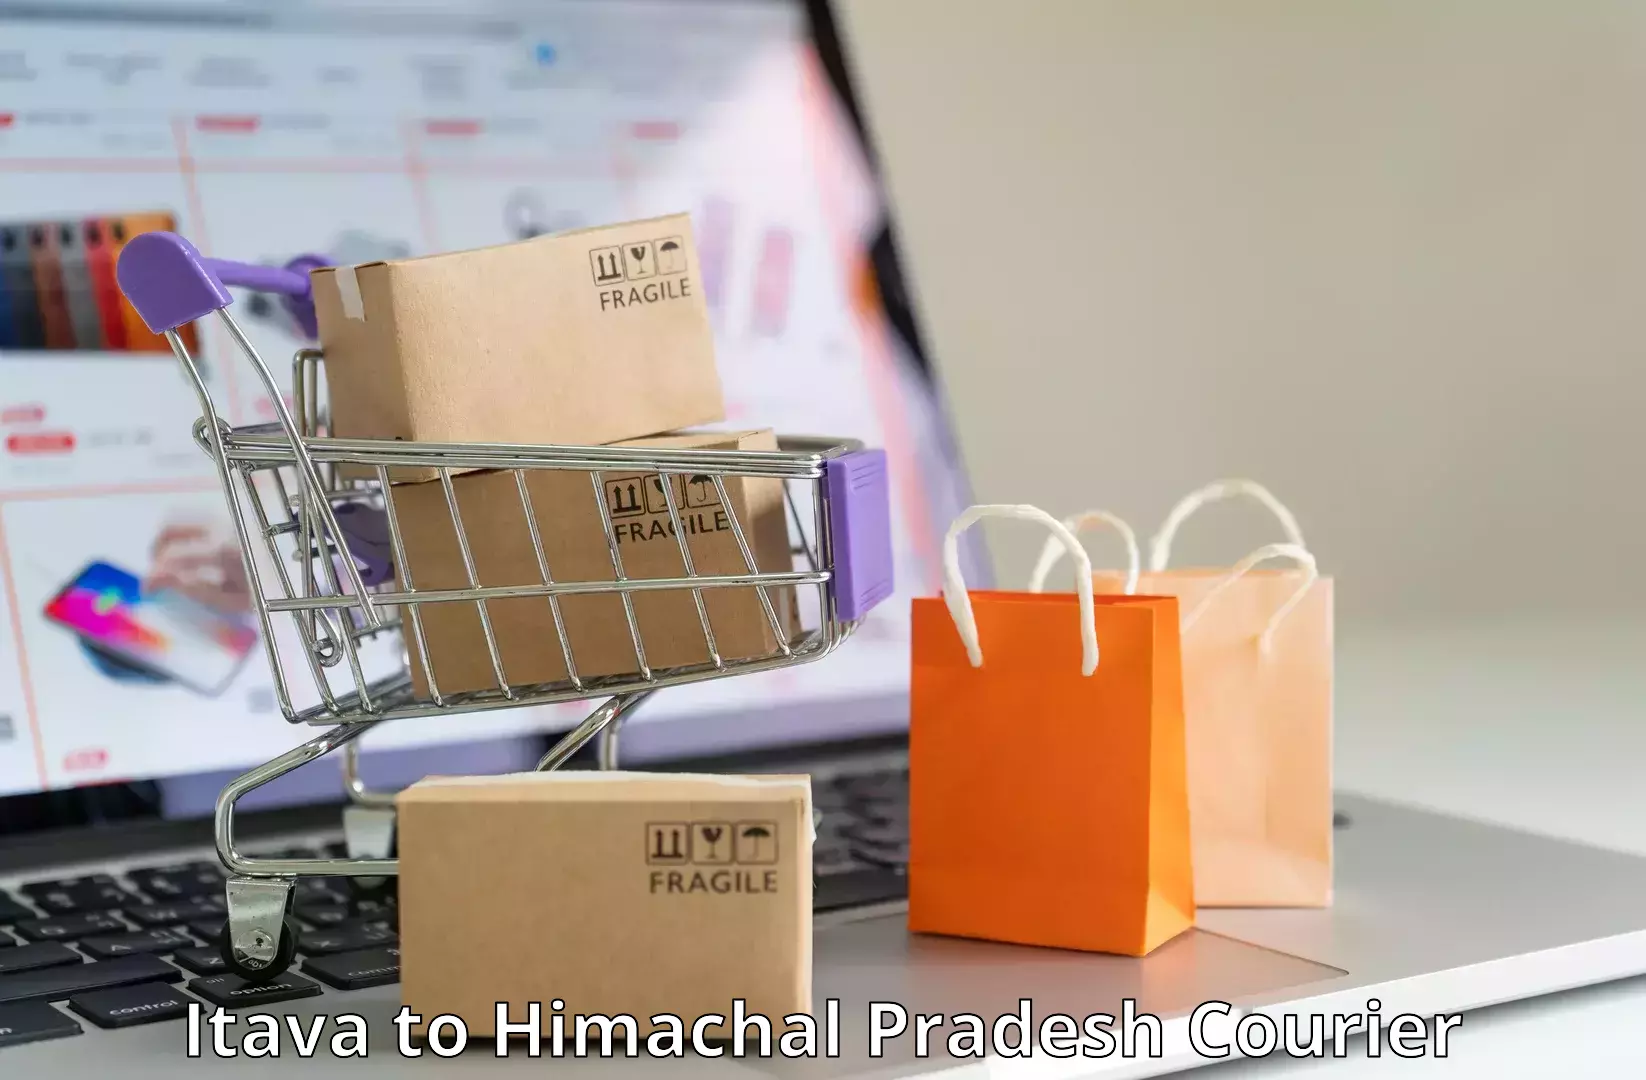 Express package handling Itava to Jahu